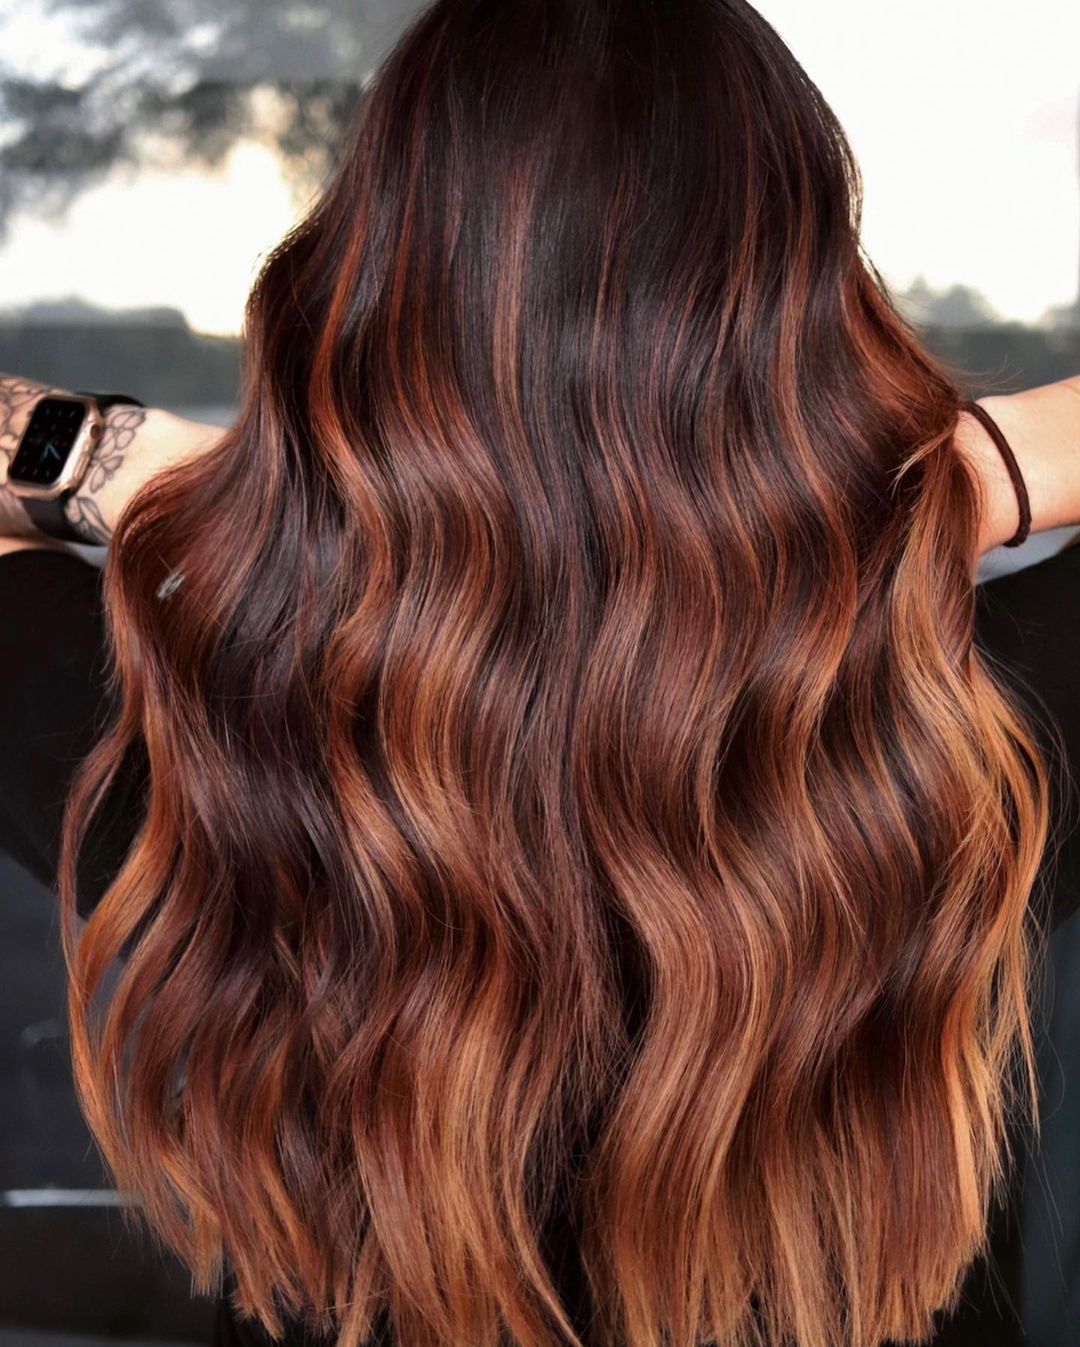 Dark Hair with Balayage in Different Shades of Red